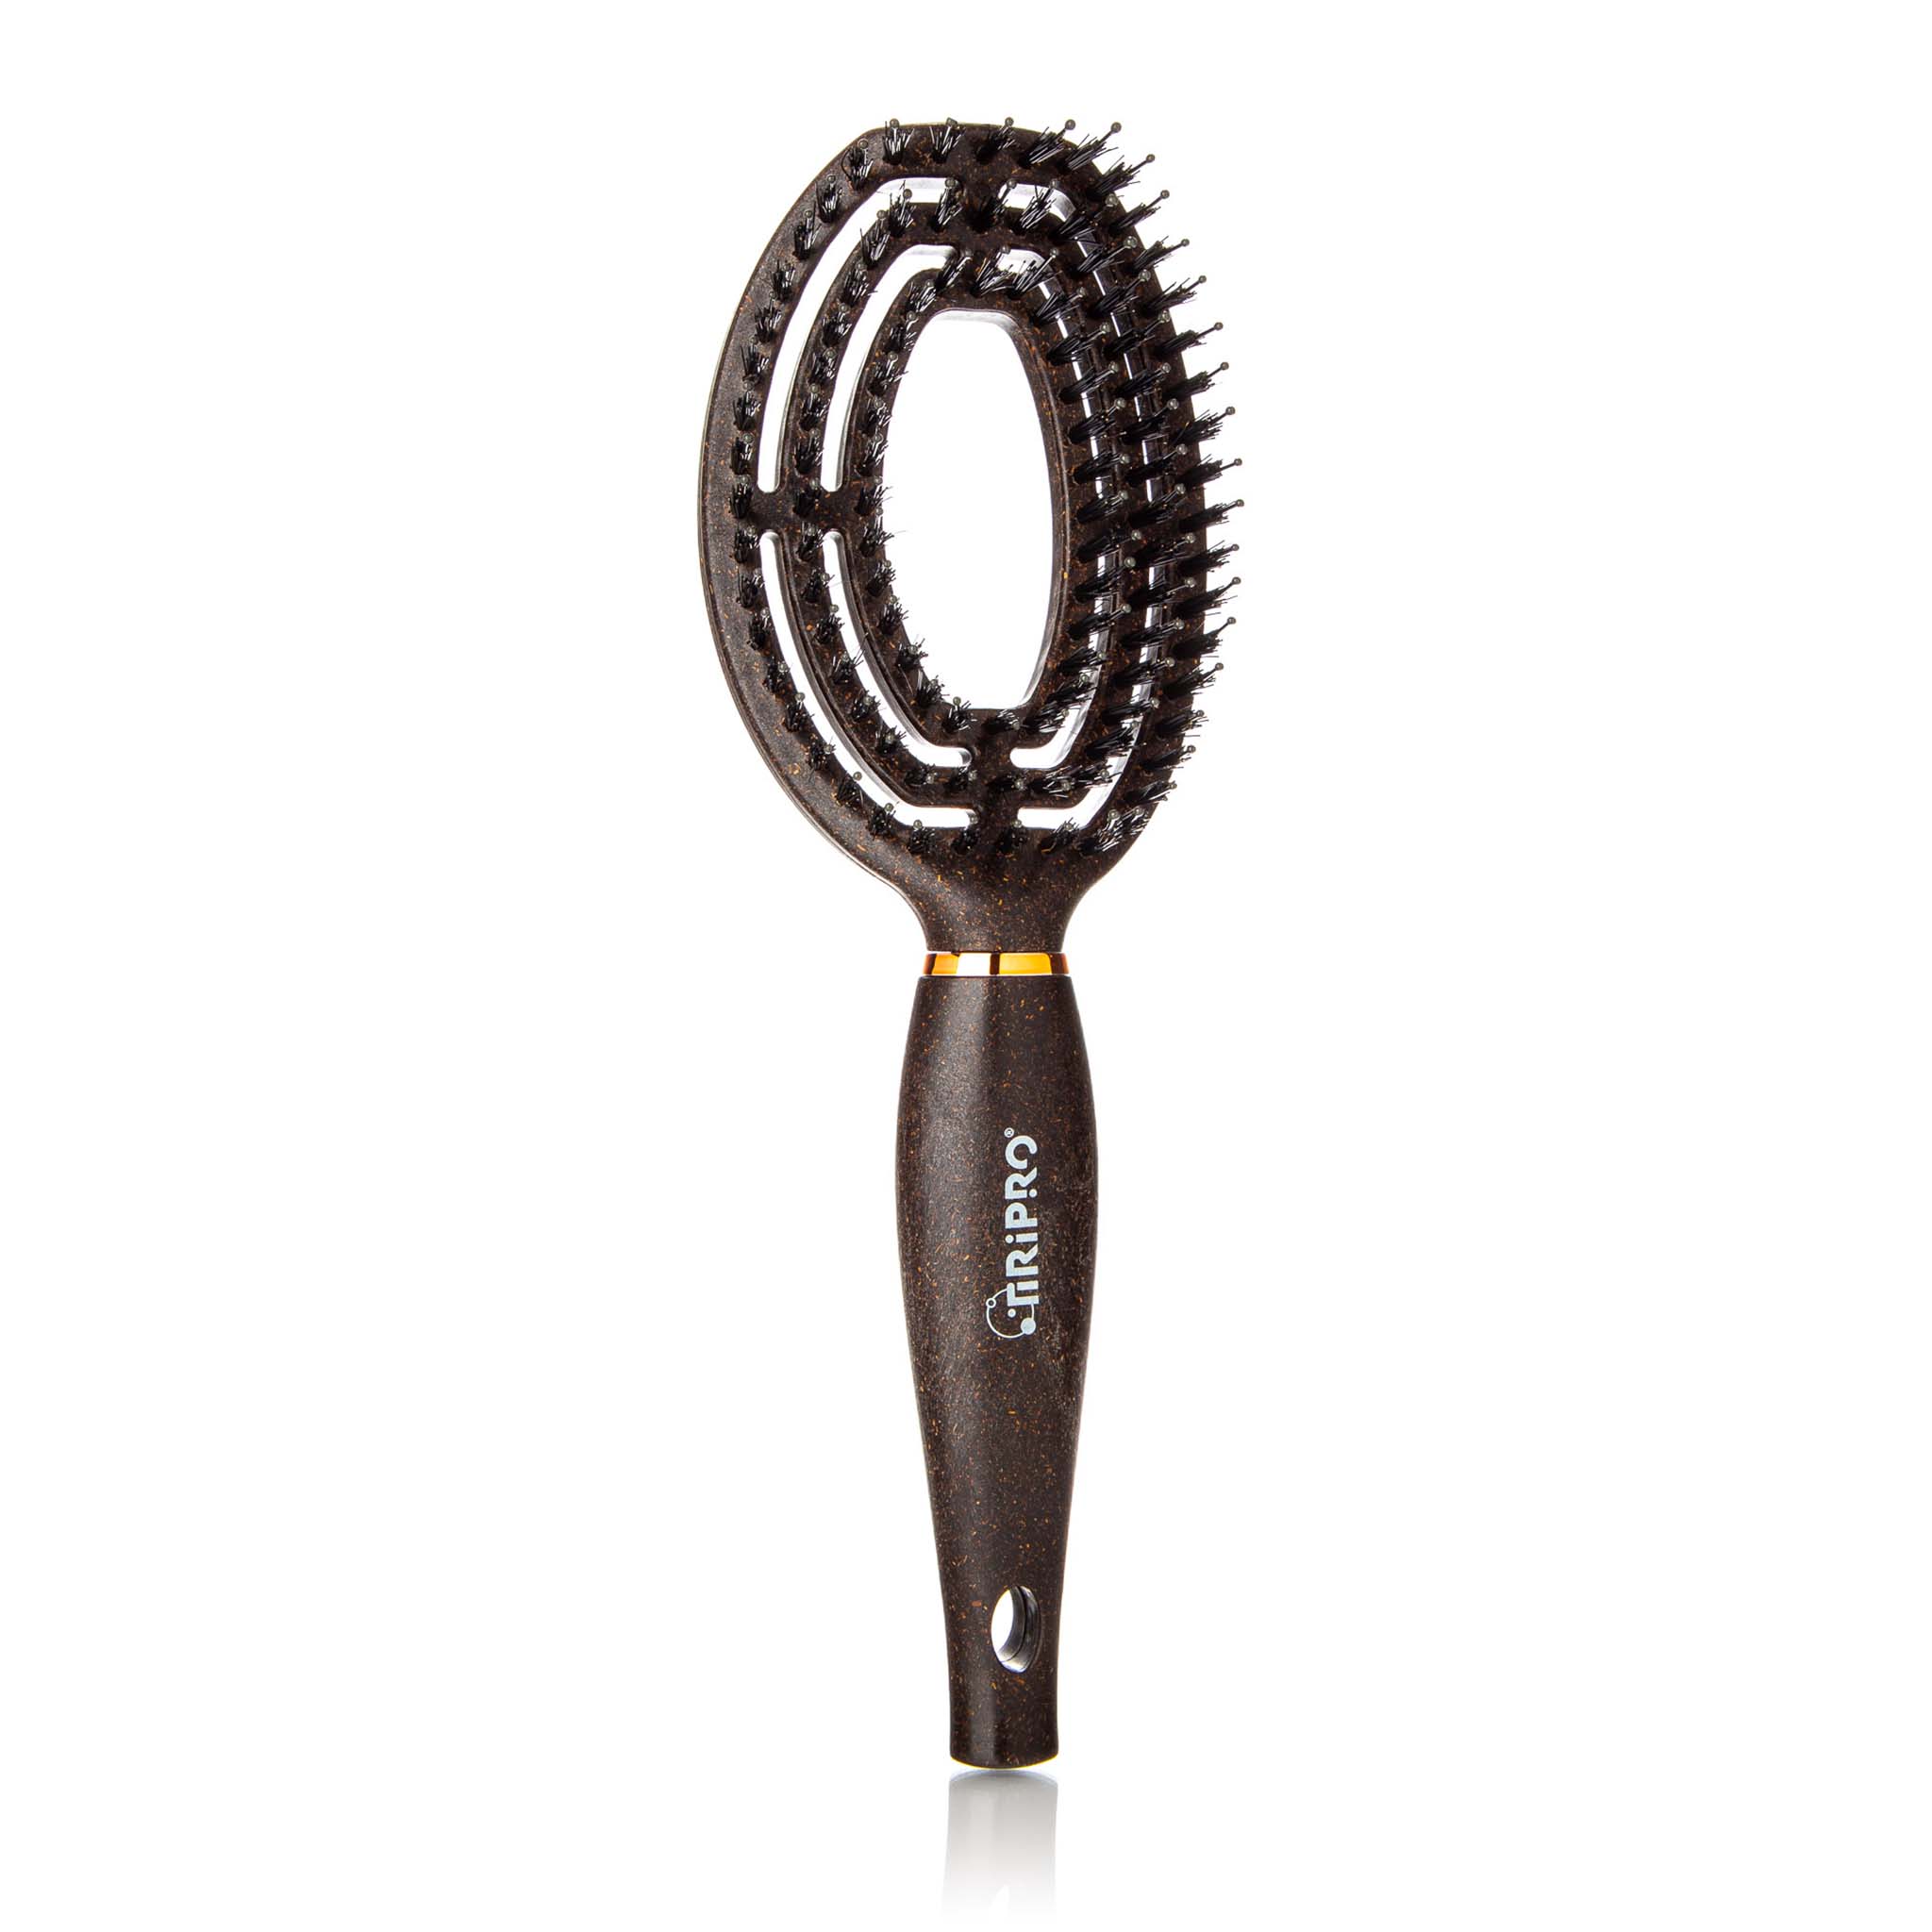 2in1 Hair Brush with Vented Spiral Design - Rice Hull